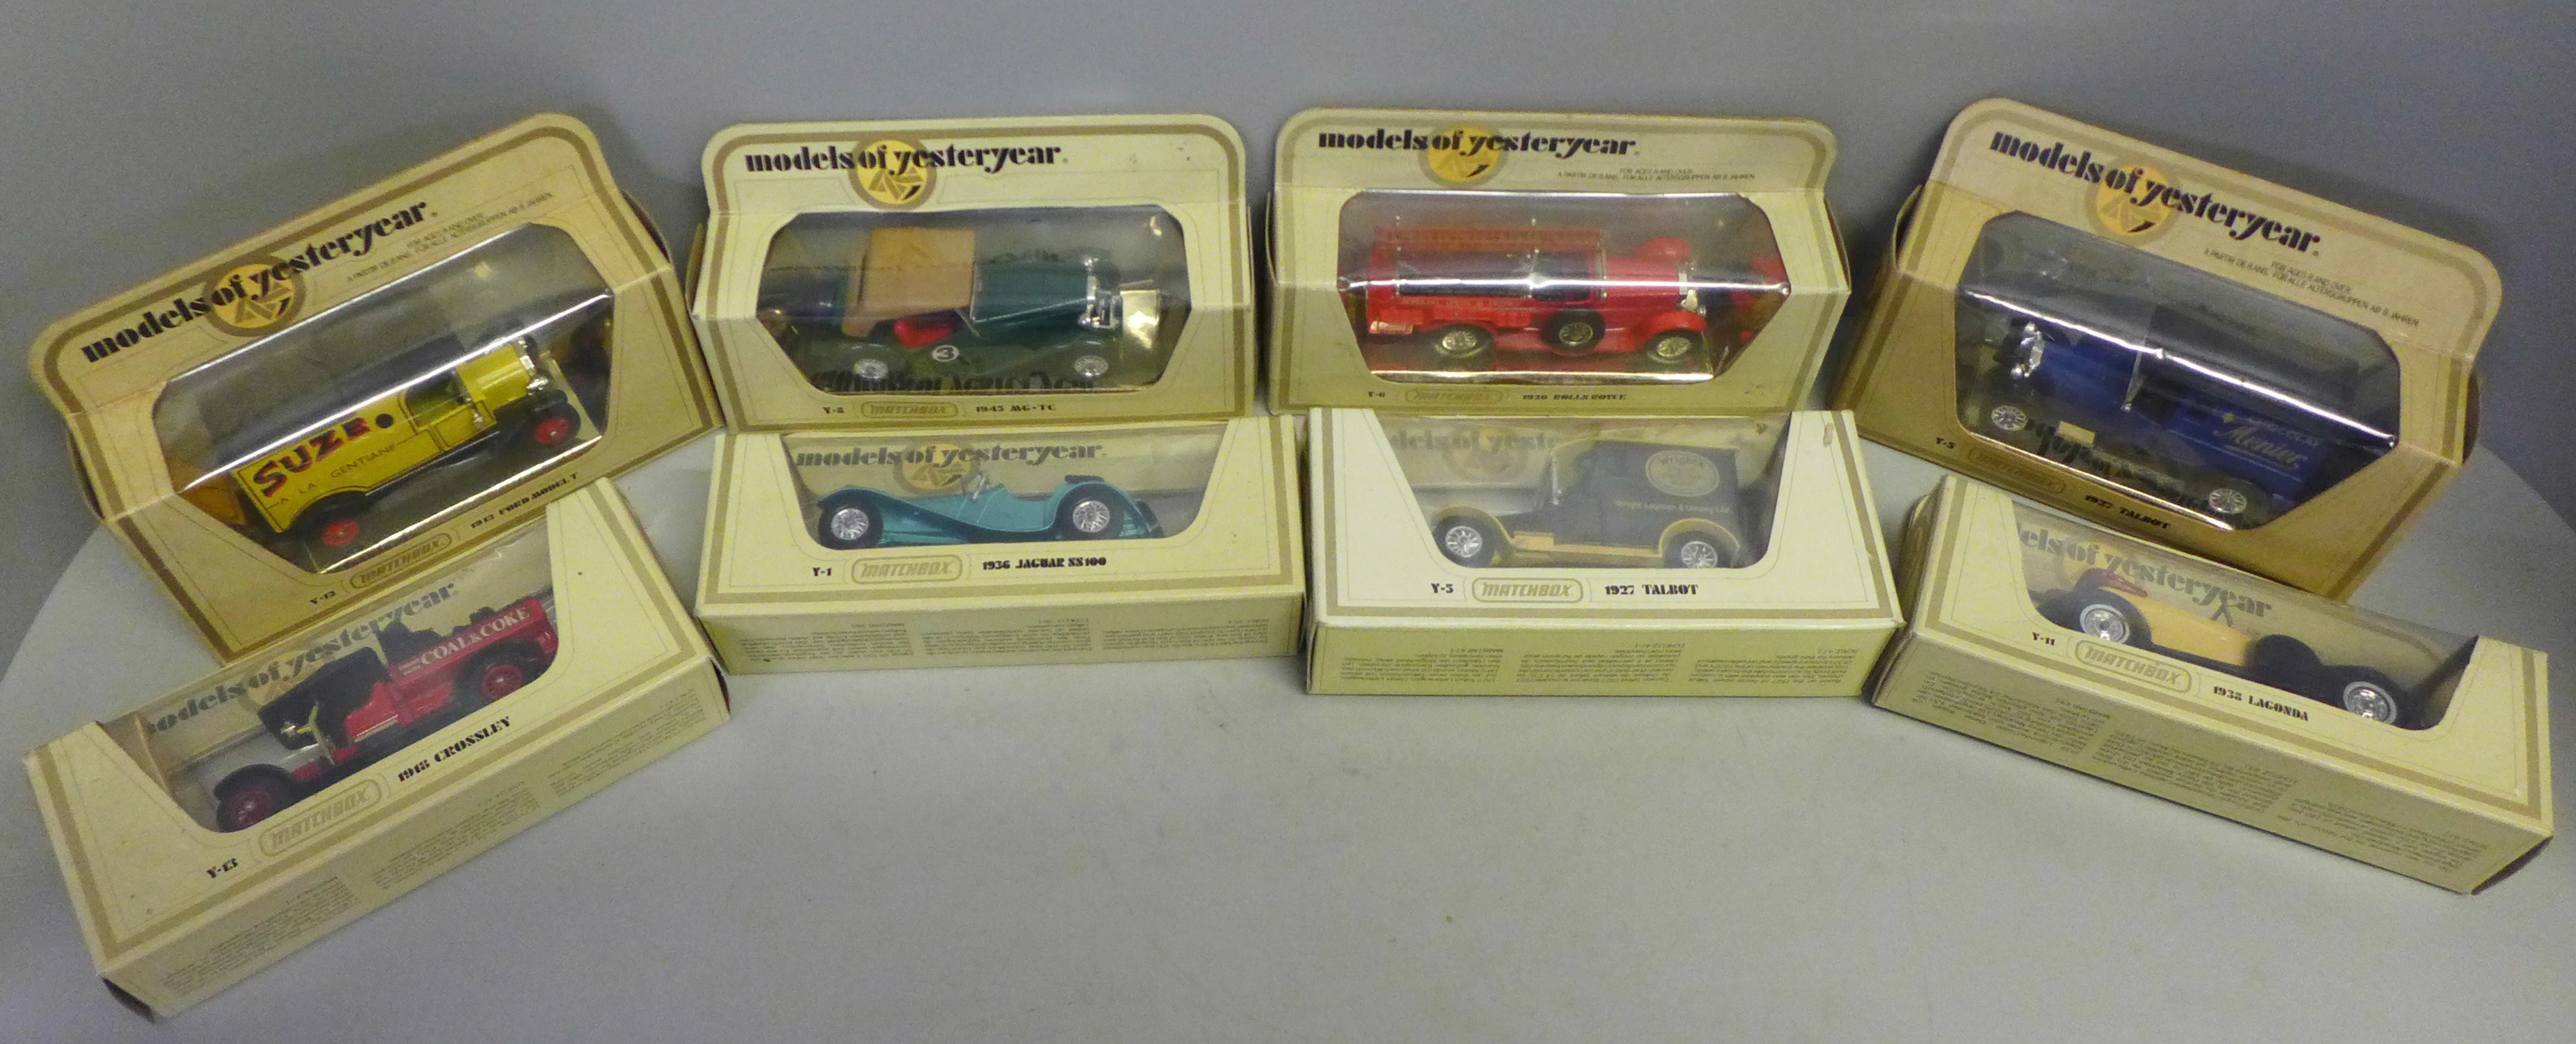 Two boxes of die cast model vehicles, Models of Yesteryear, Days Gone, Corgi, etc - Image 3 of 4